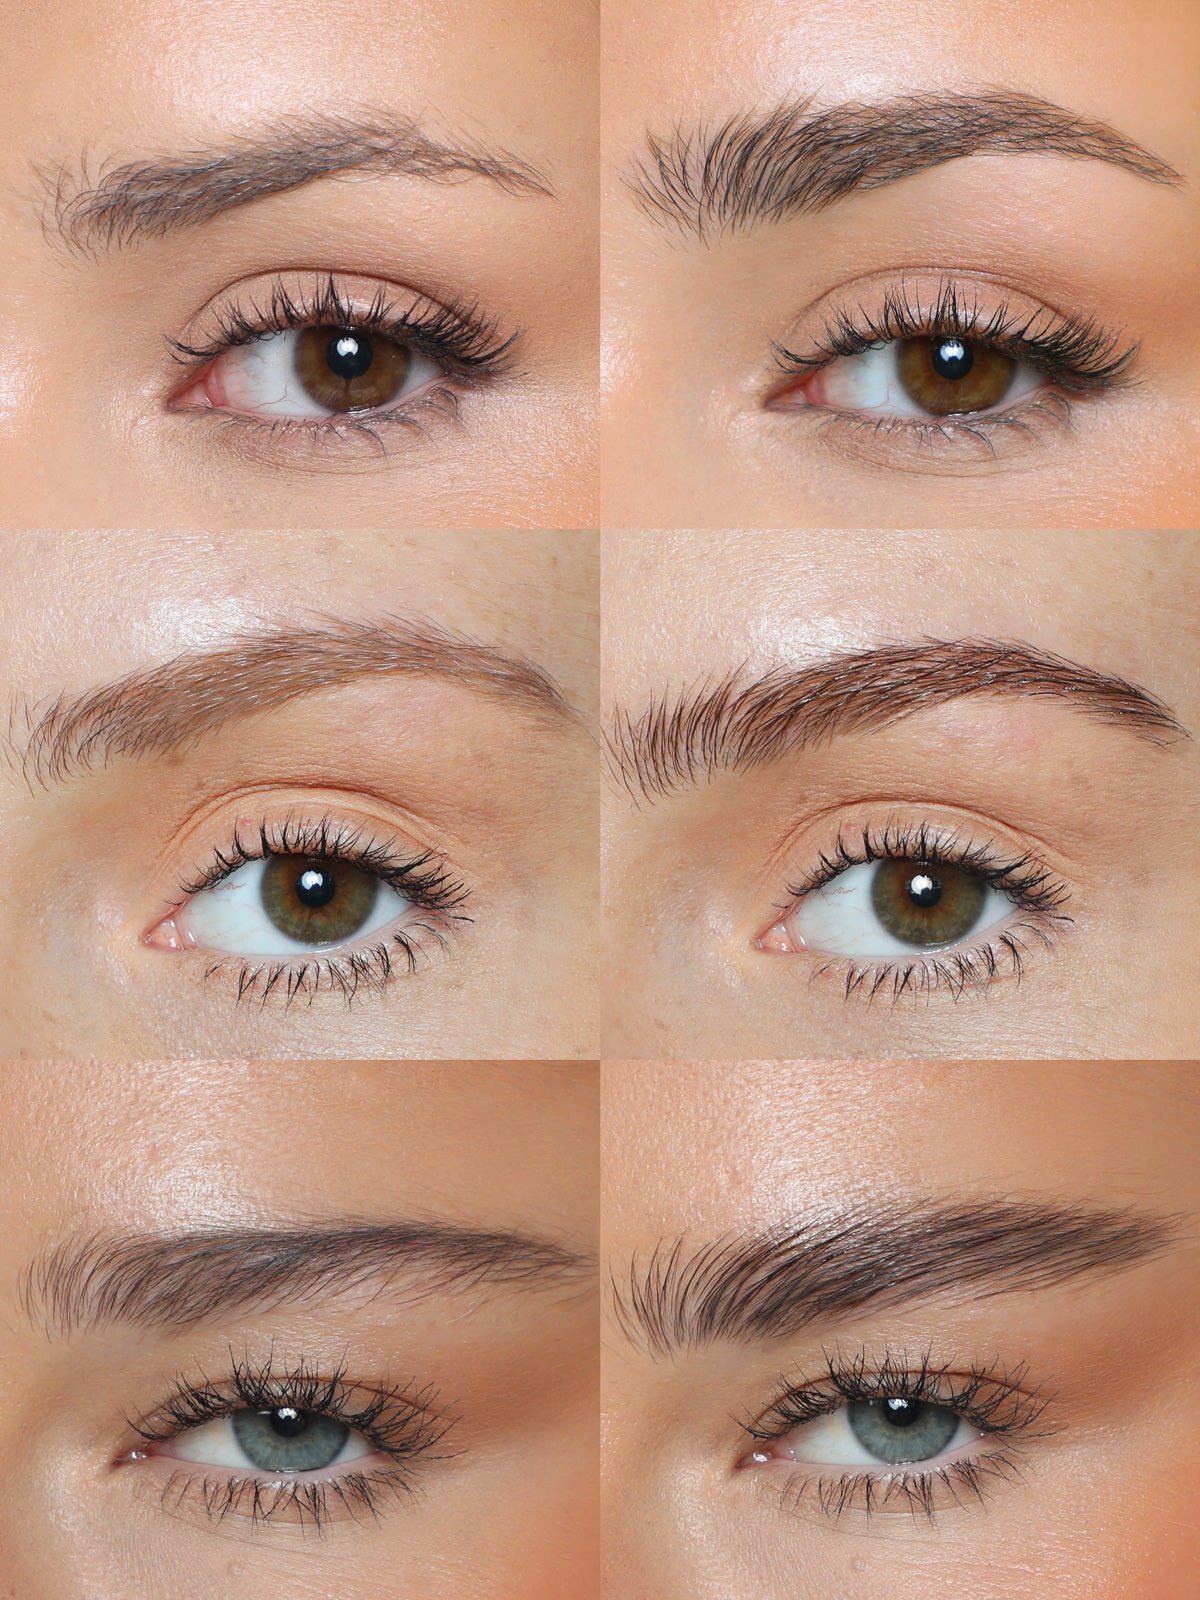 REFY Brow Tint in Medium Brown on Models Before and After